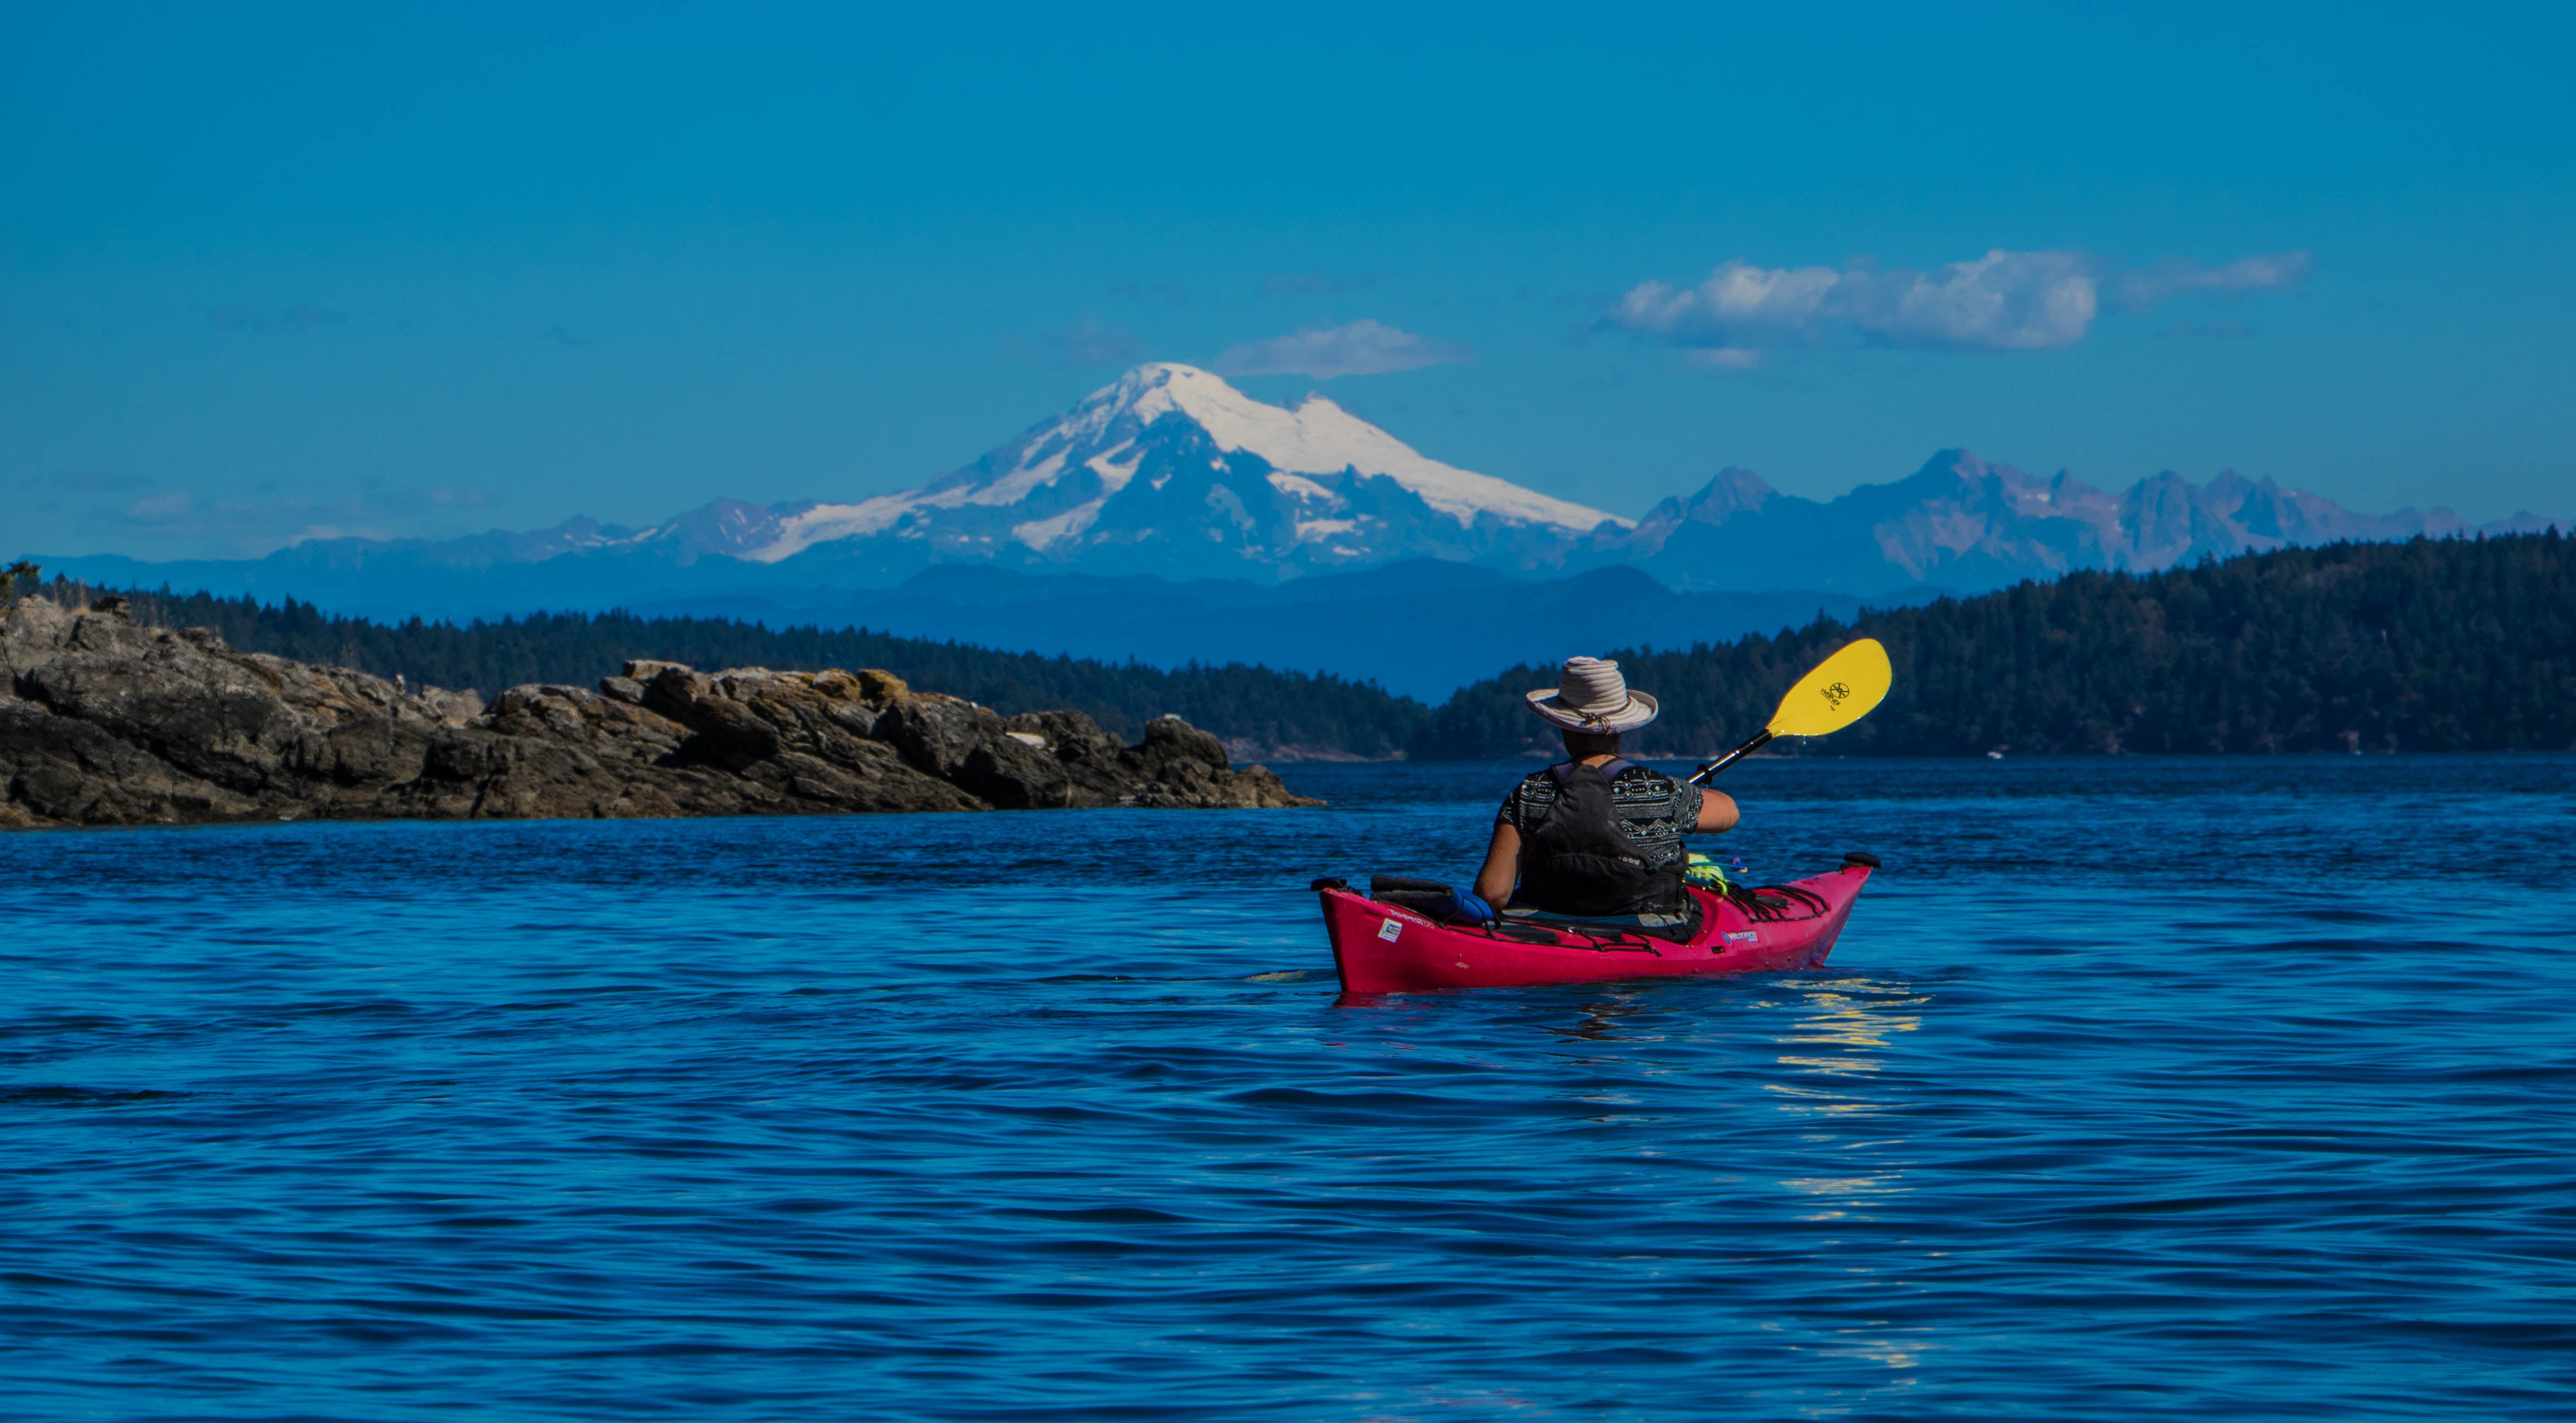 As you paddle up to the island, you may see this view of Mt. Baker!